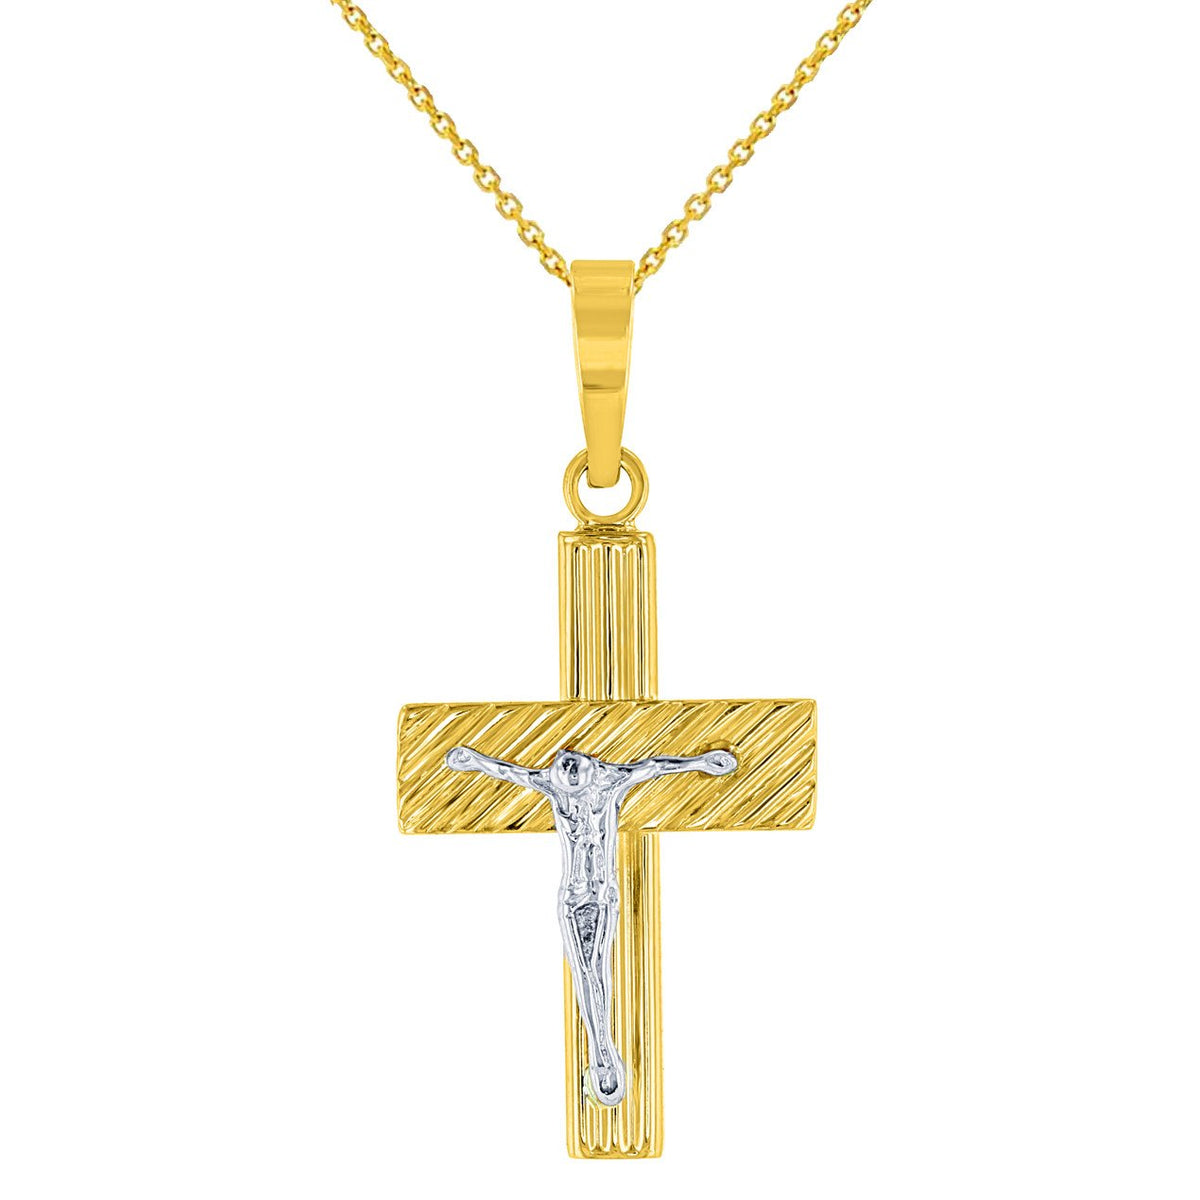 14K Two-Tone Gold Textured Cross Crucifix with Jesus Christ Pendant Necklace